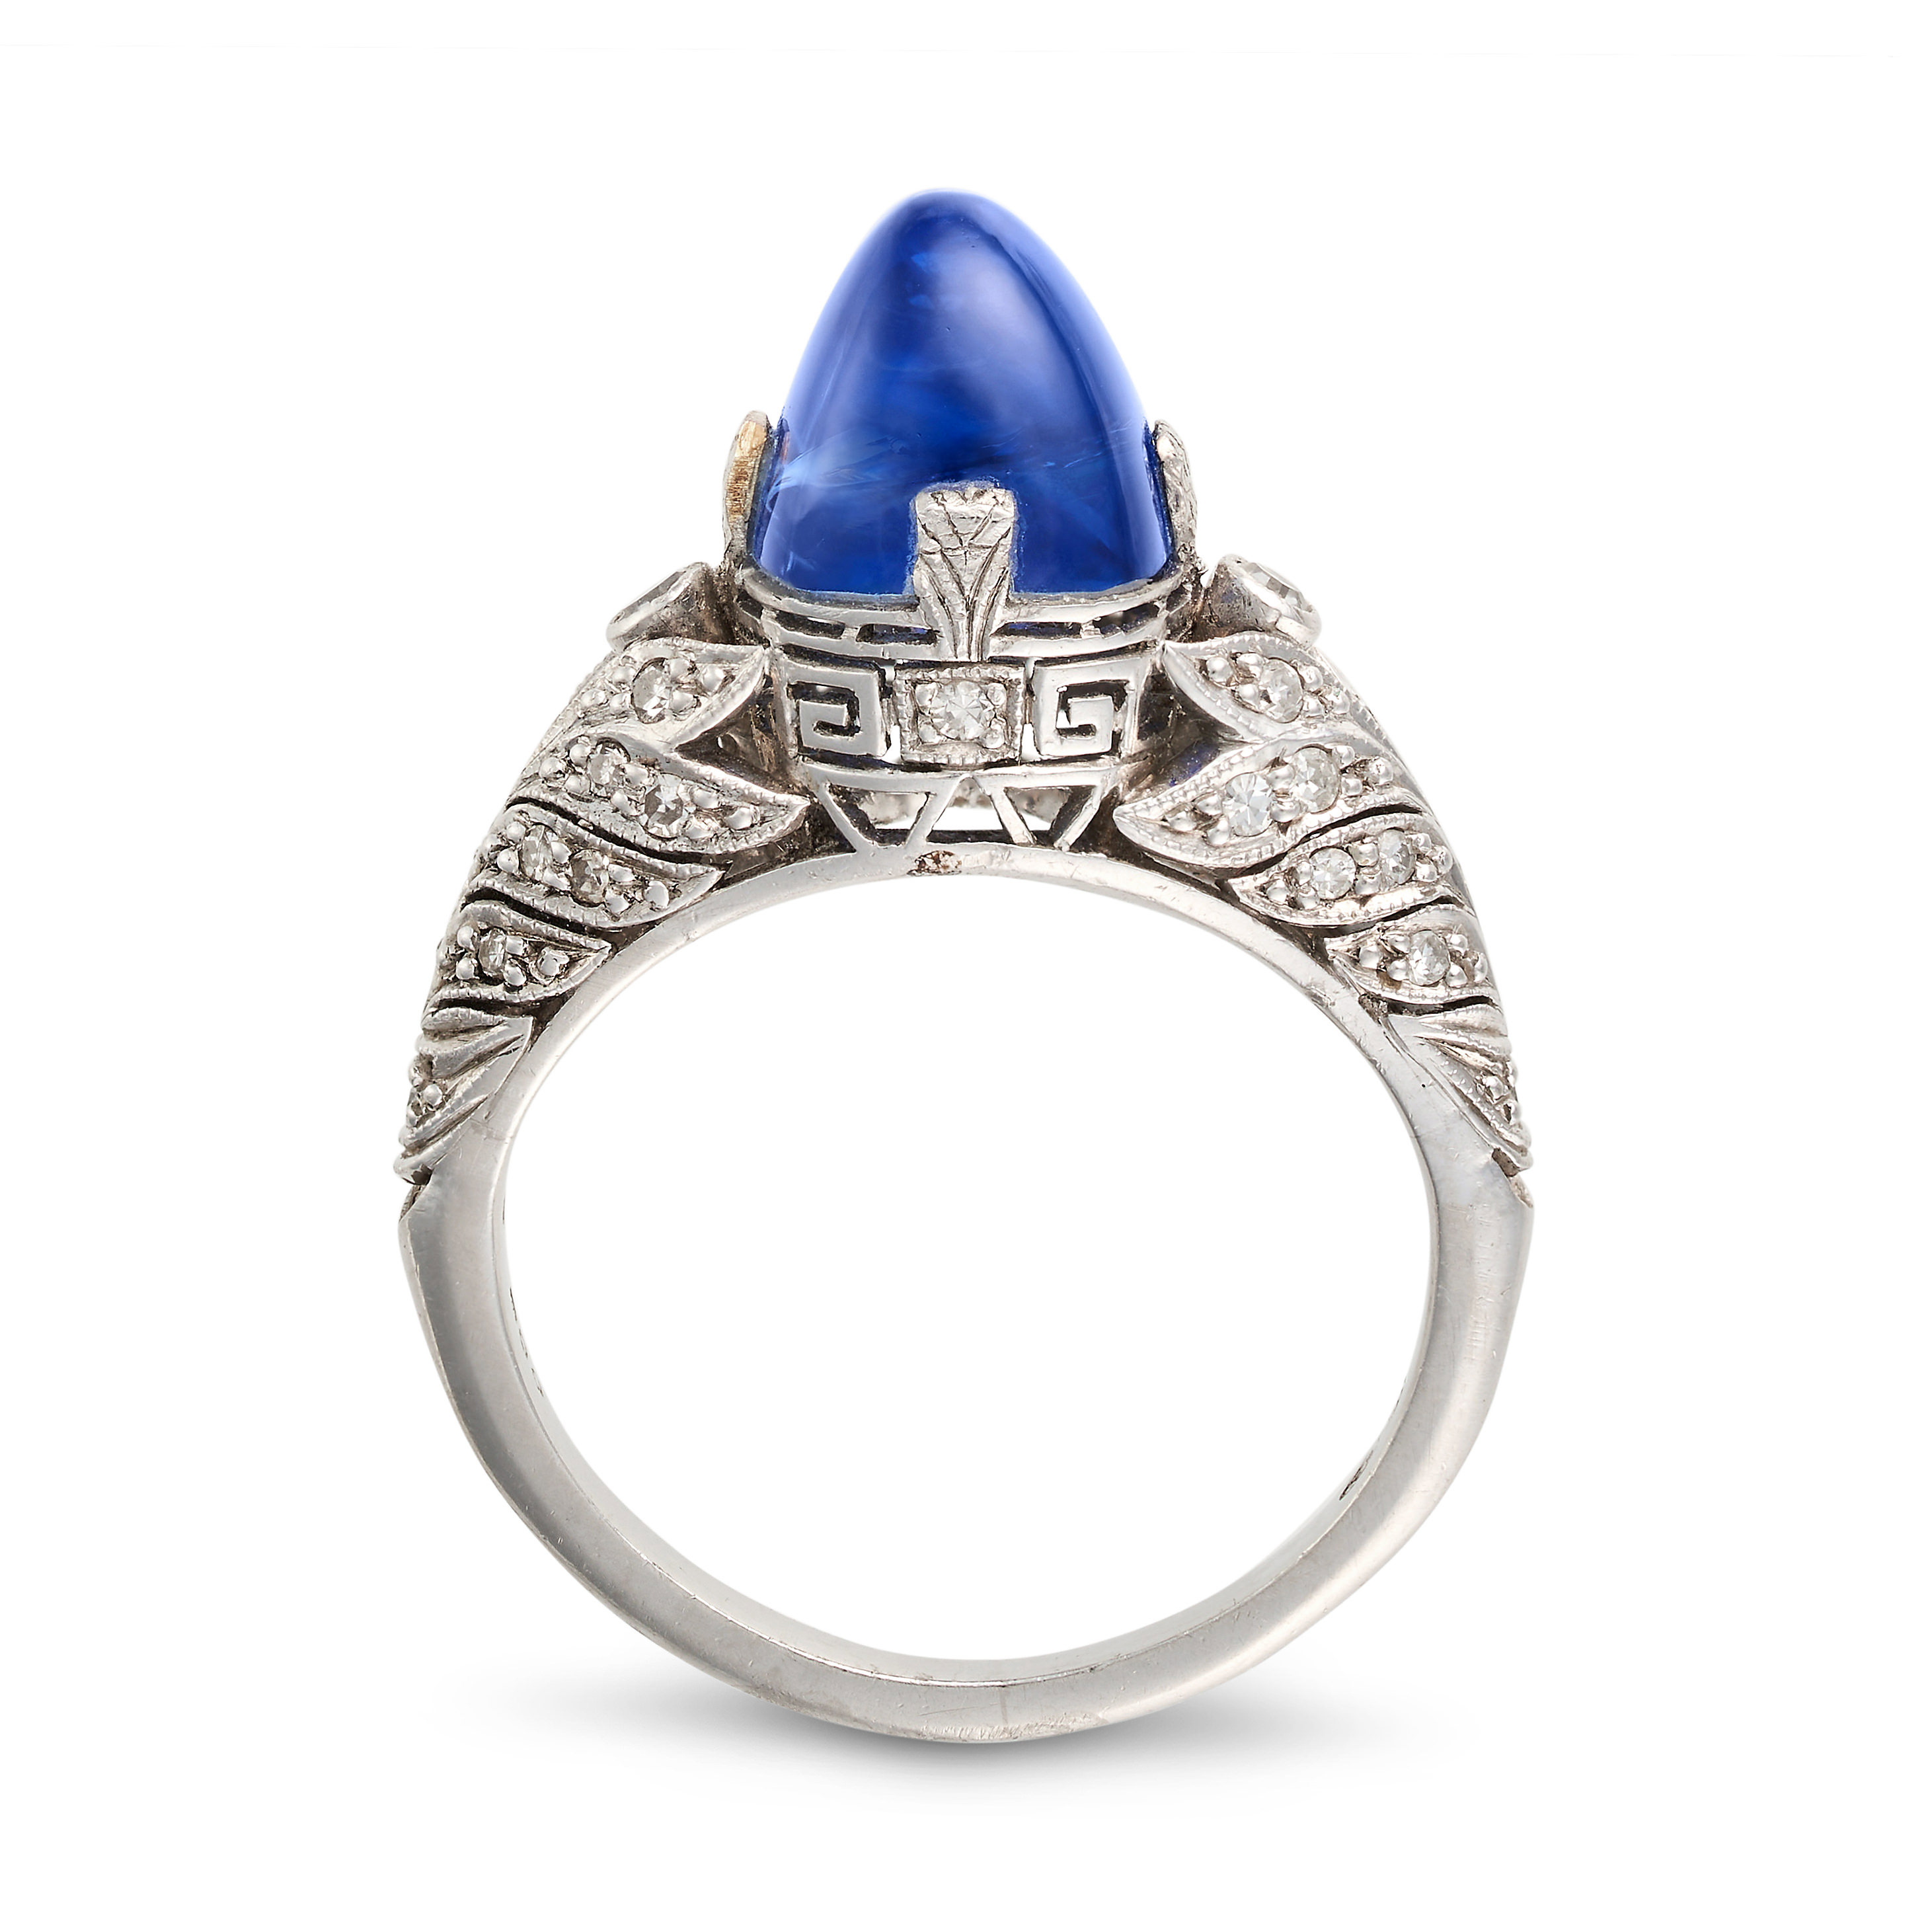 AN ART DECO KASHMIR SAPPHIRE AND DIAMOND RING in platinum, set with a sugarloaf cabochon sapphire...